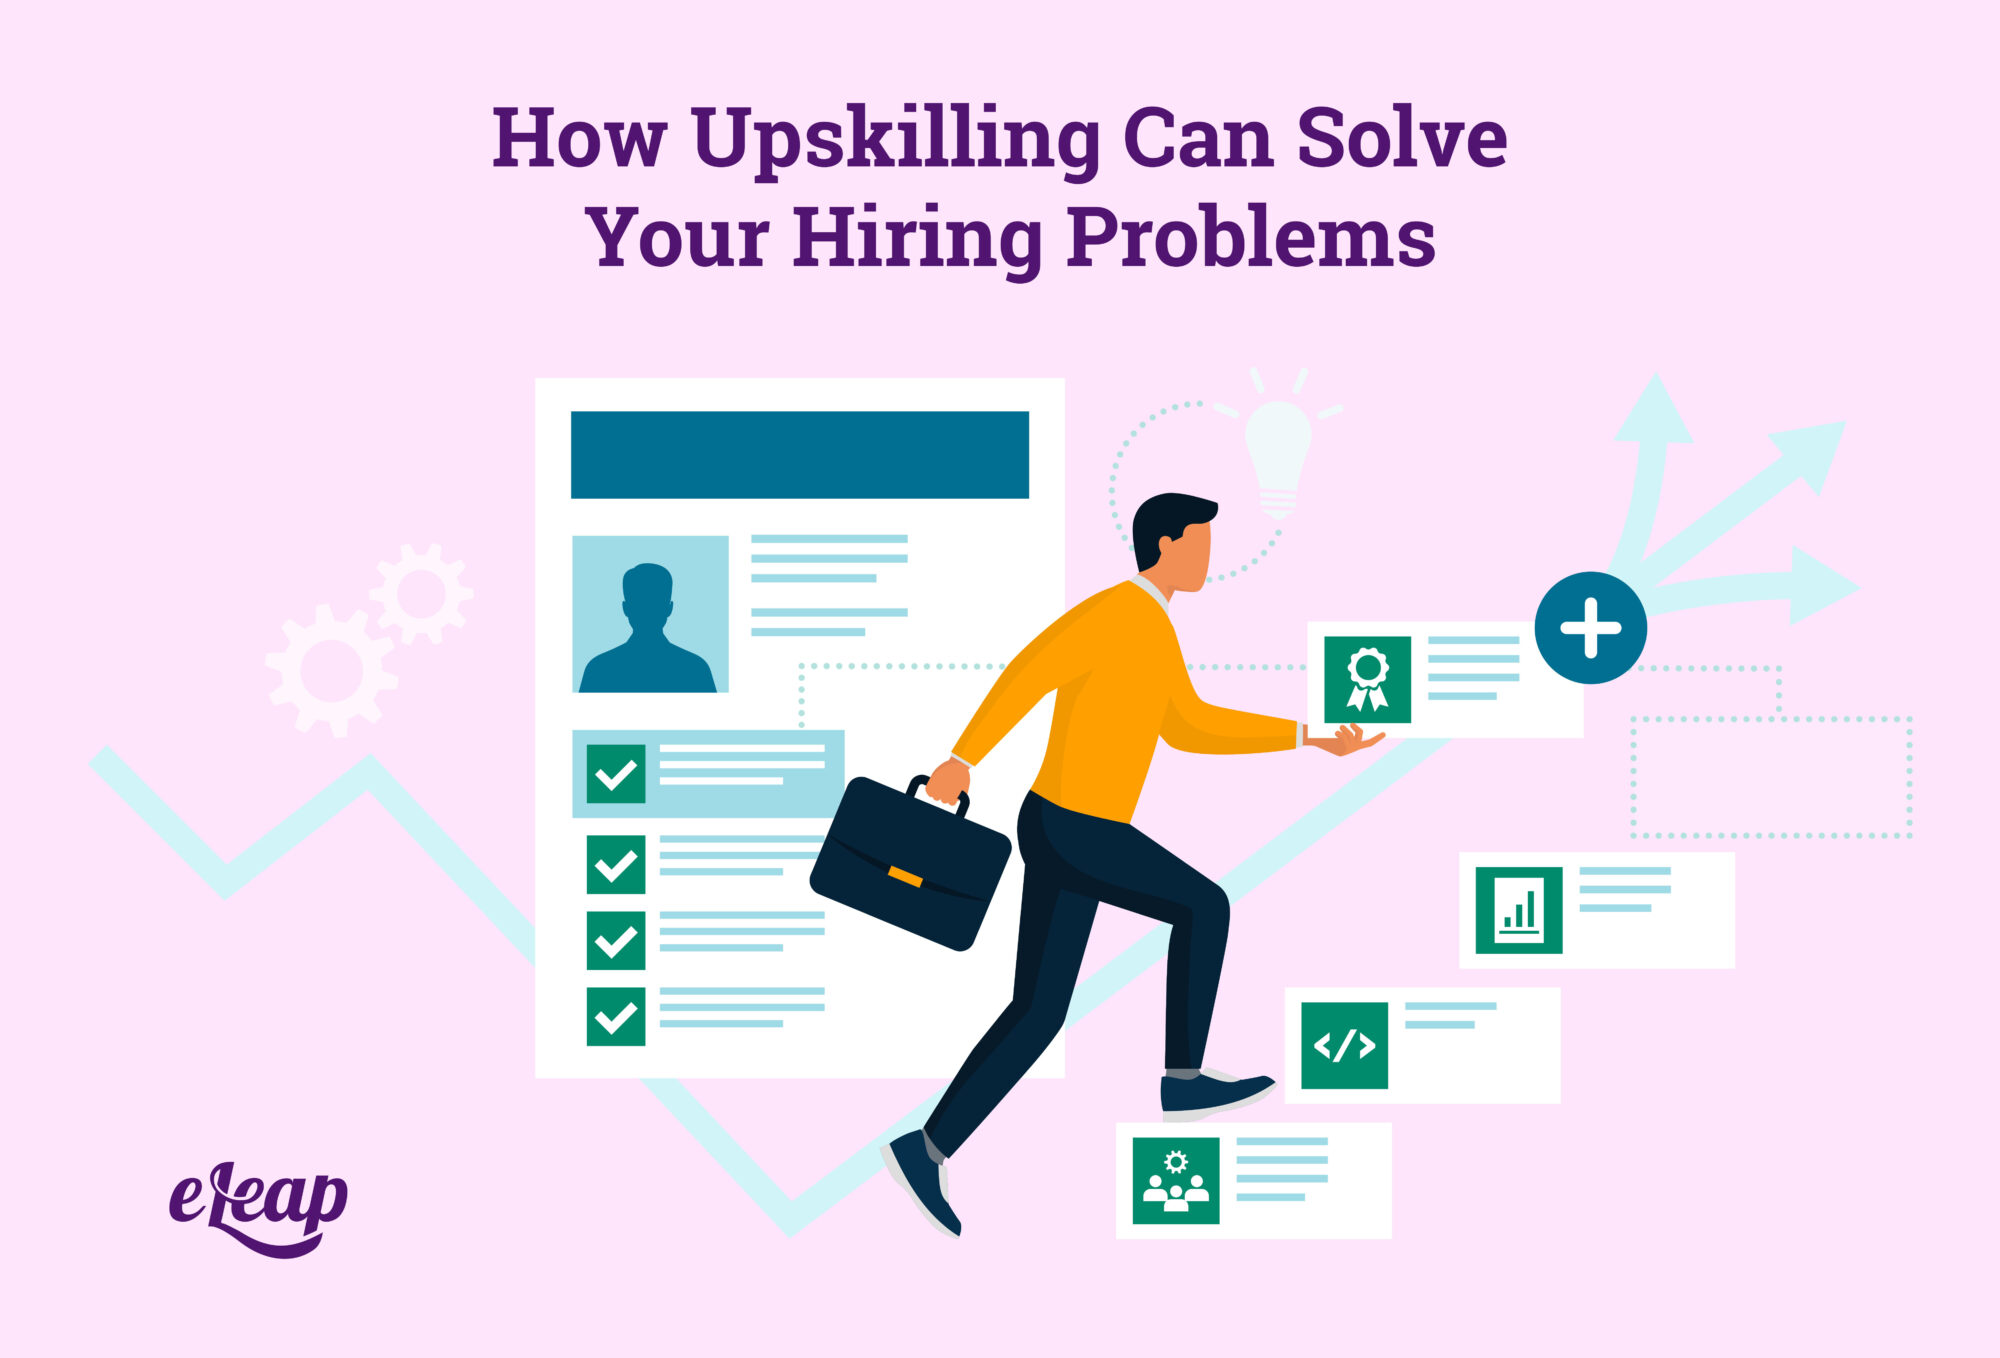 How Upskilling Can Solve Your Hiring Problems